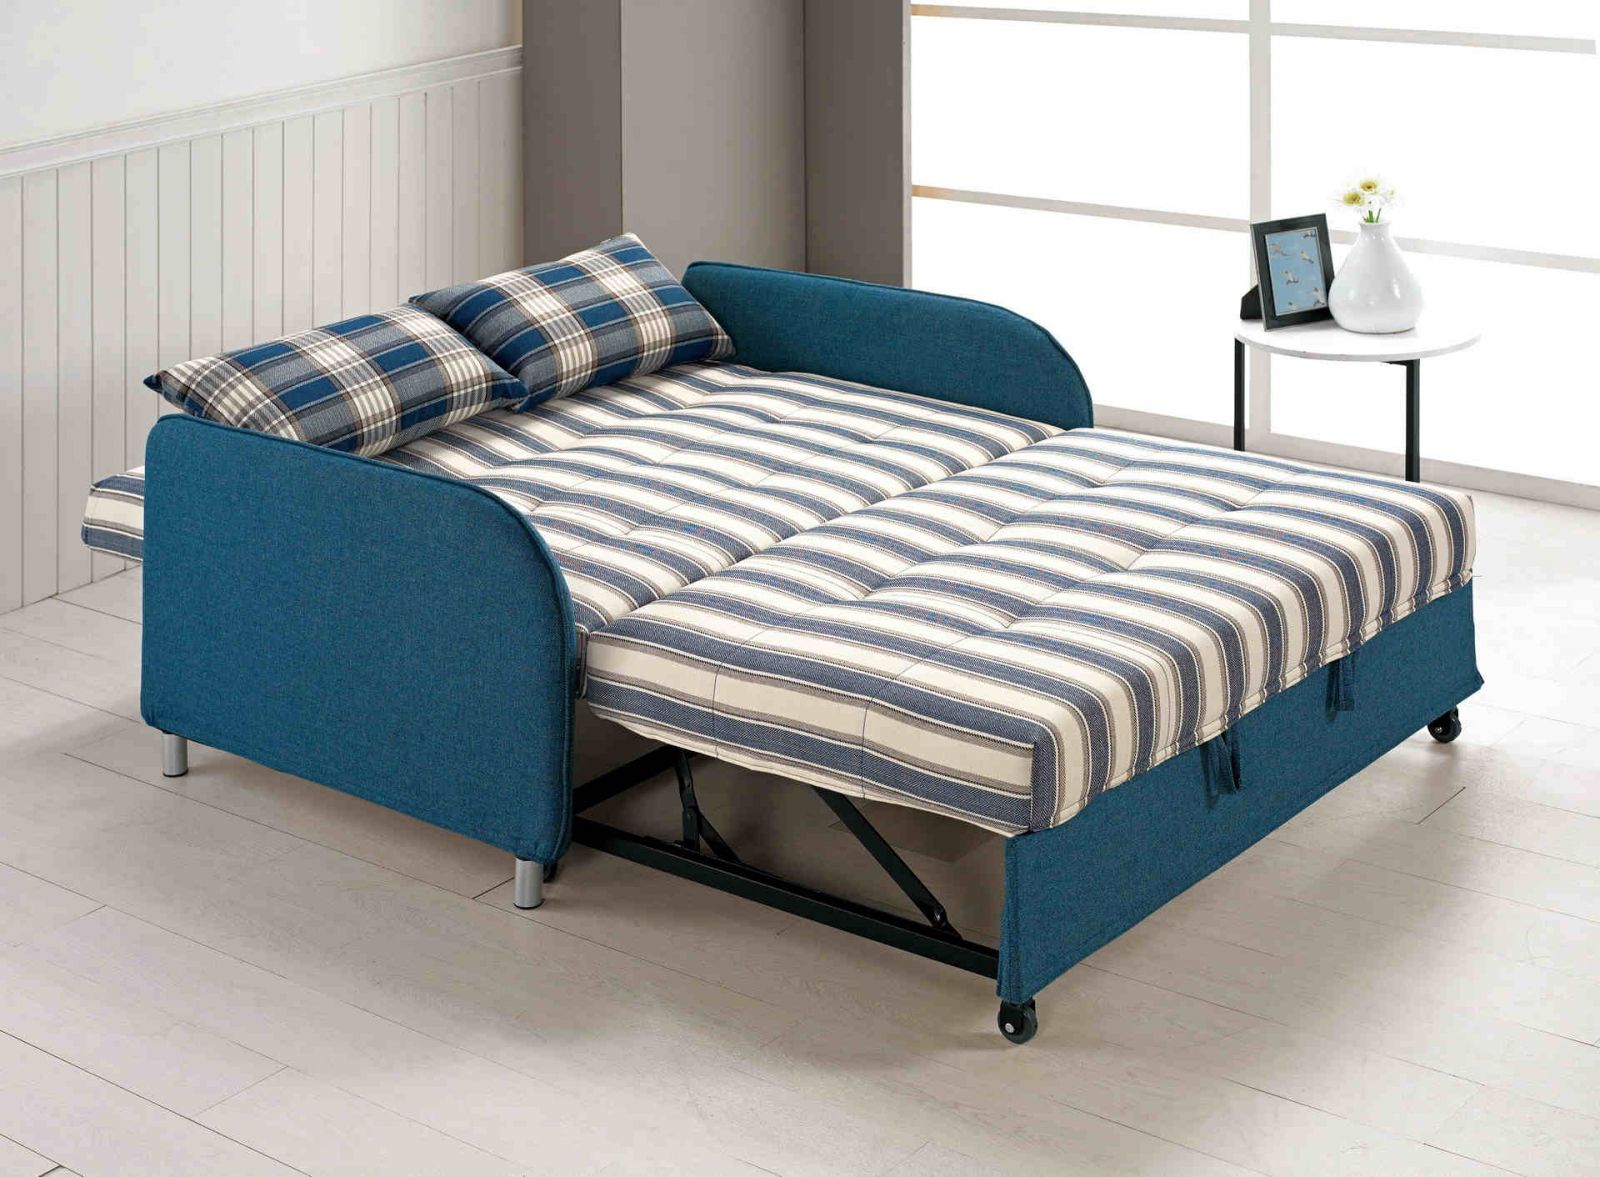 Sofa Bed for kids designs